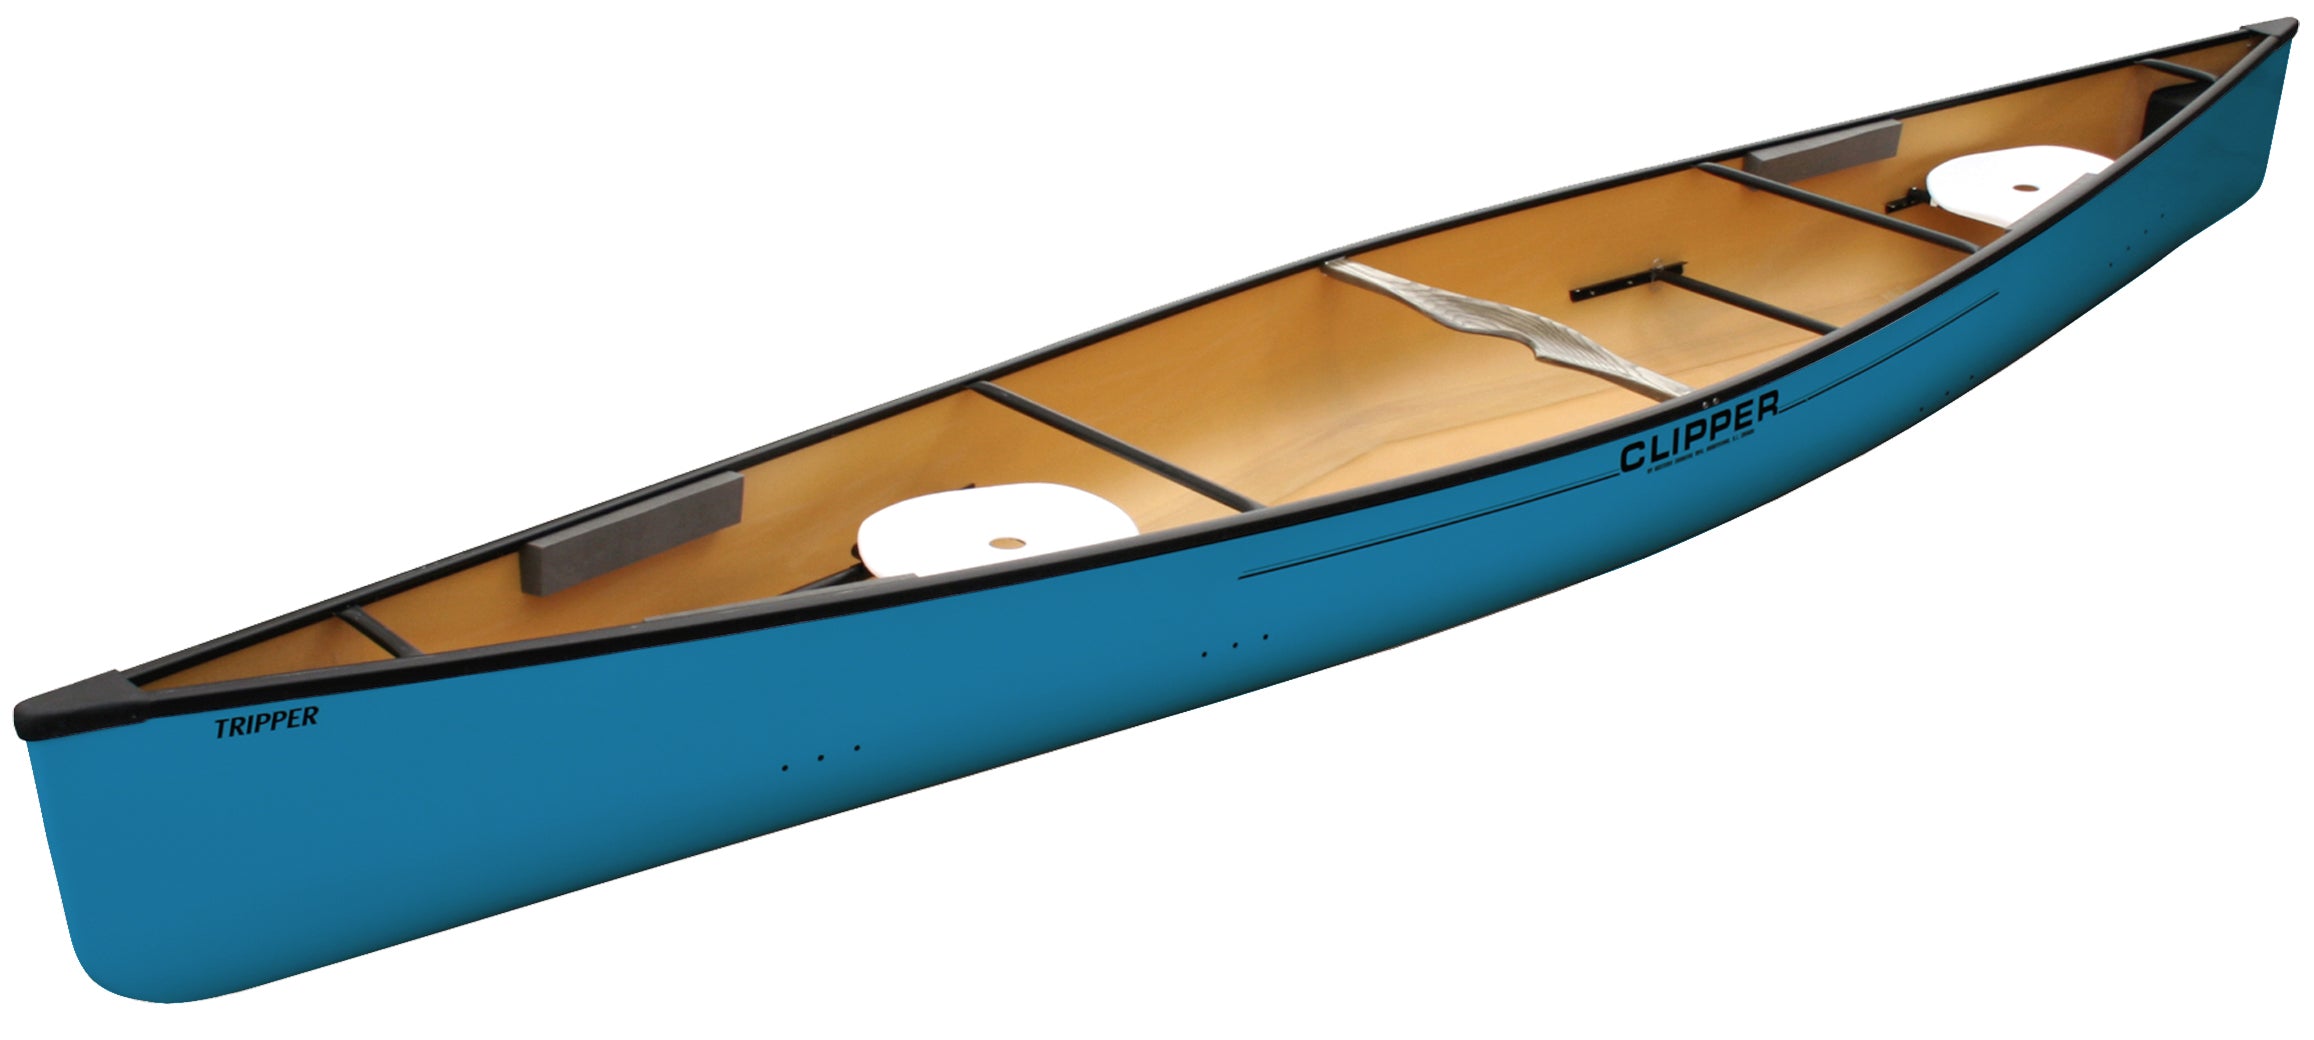 Tripper - Tripping Canoes, Clipper Canoes